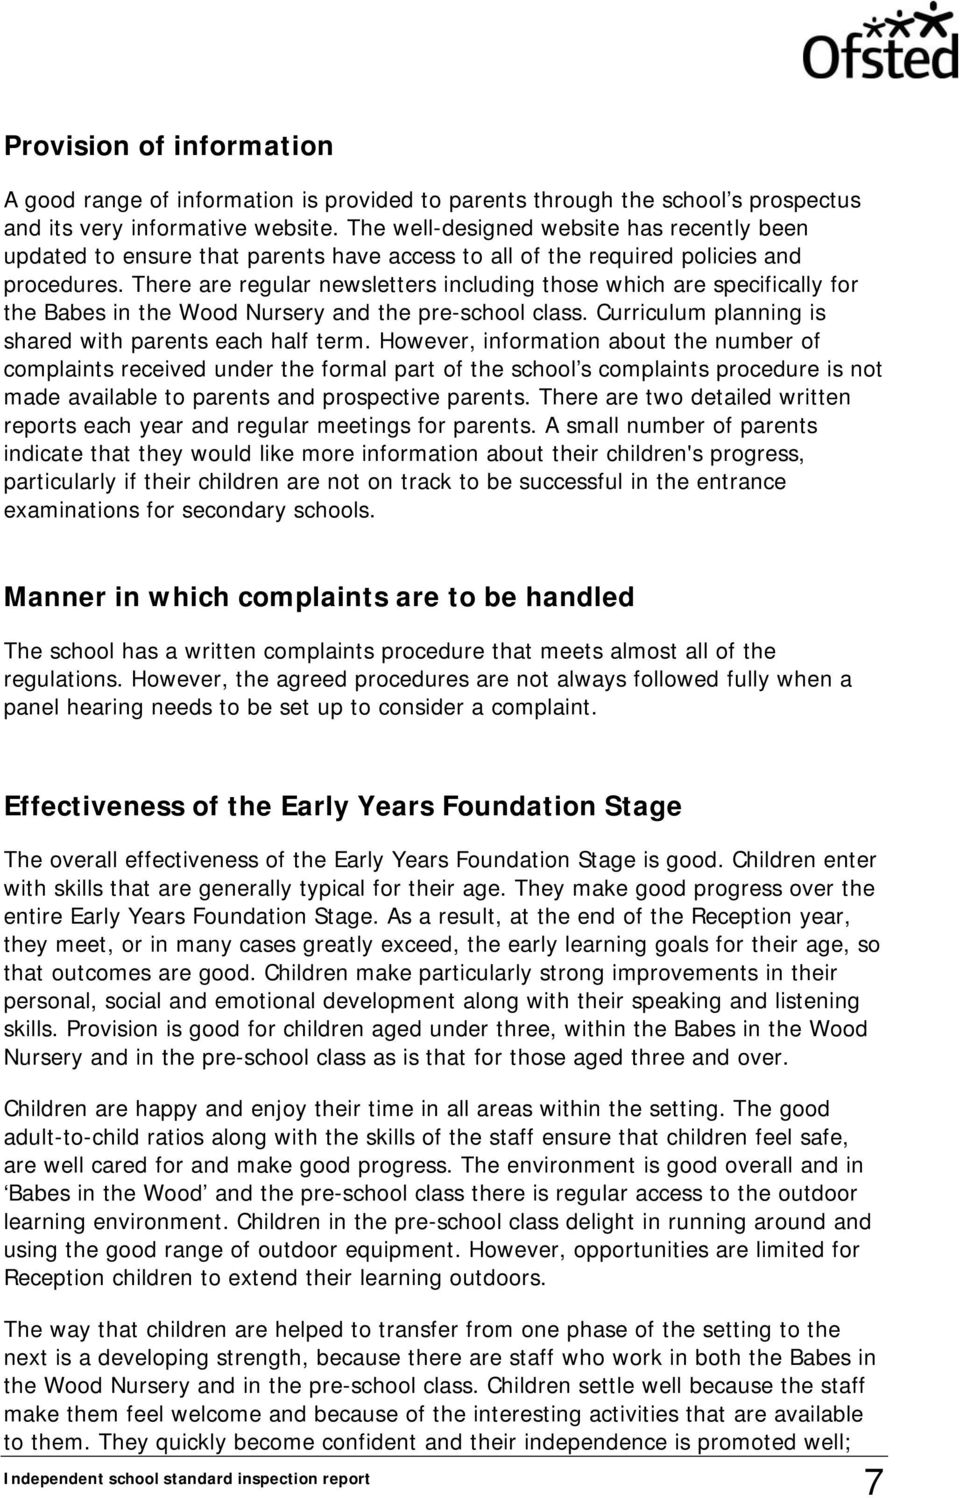 There are regular newsletters including those which are specifically for the Babes in the Wood Nursery and the pre-school class. Curriculum planning is shared with parents each half term.